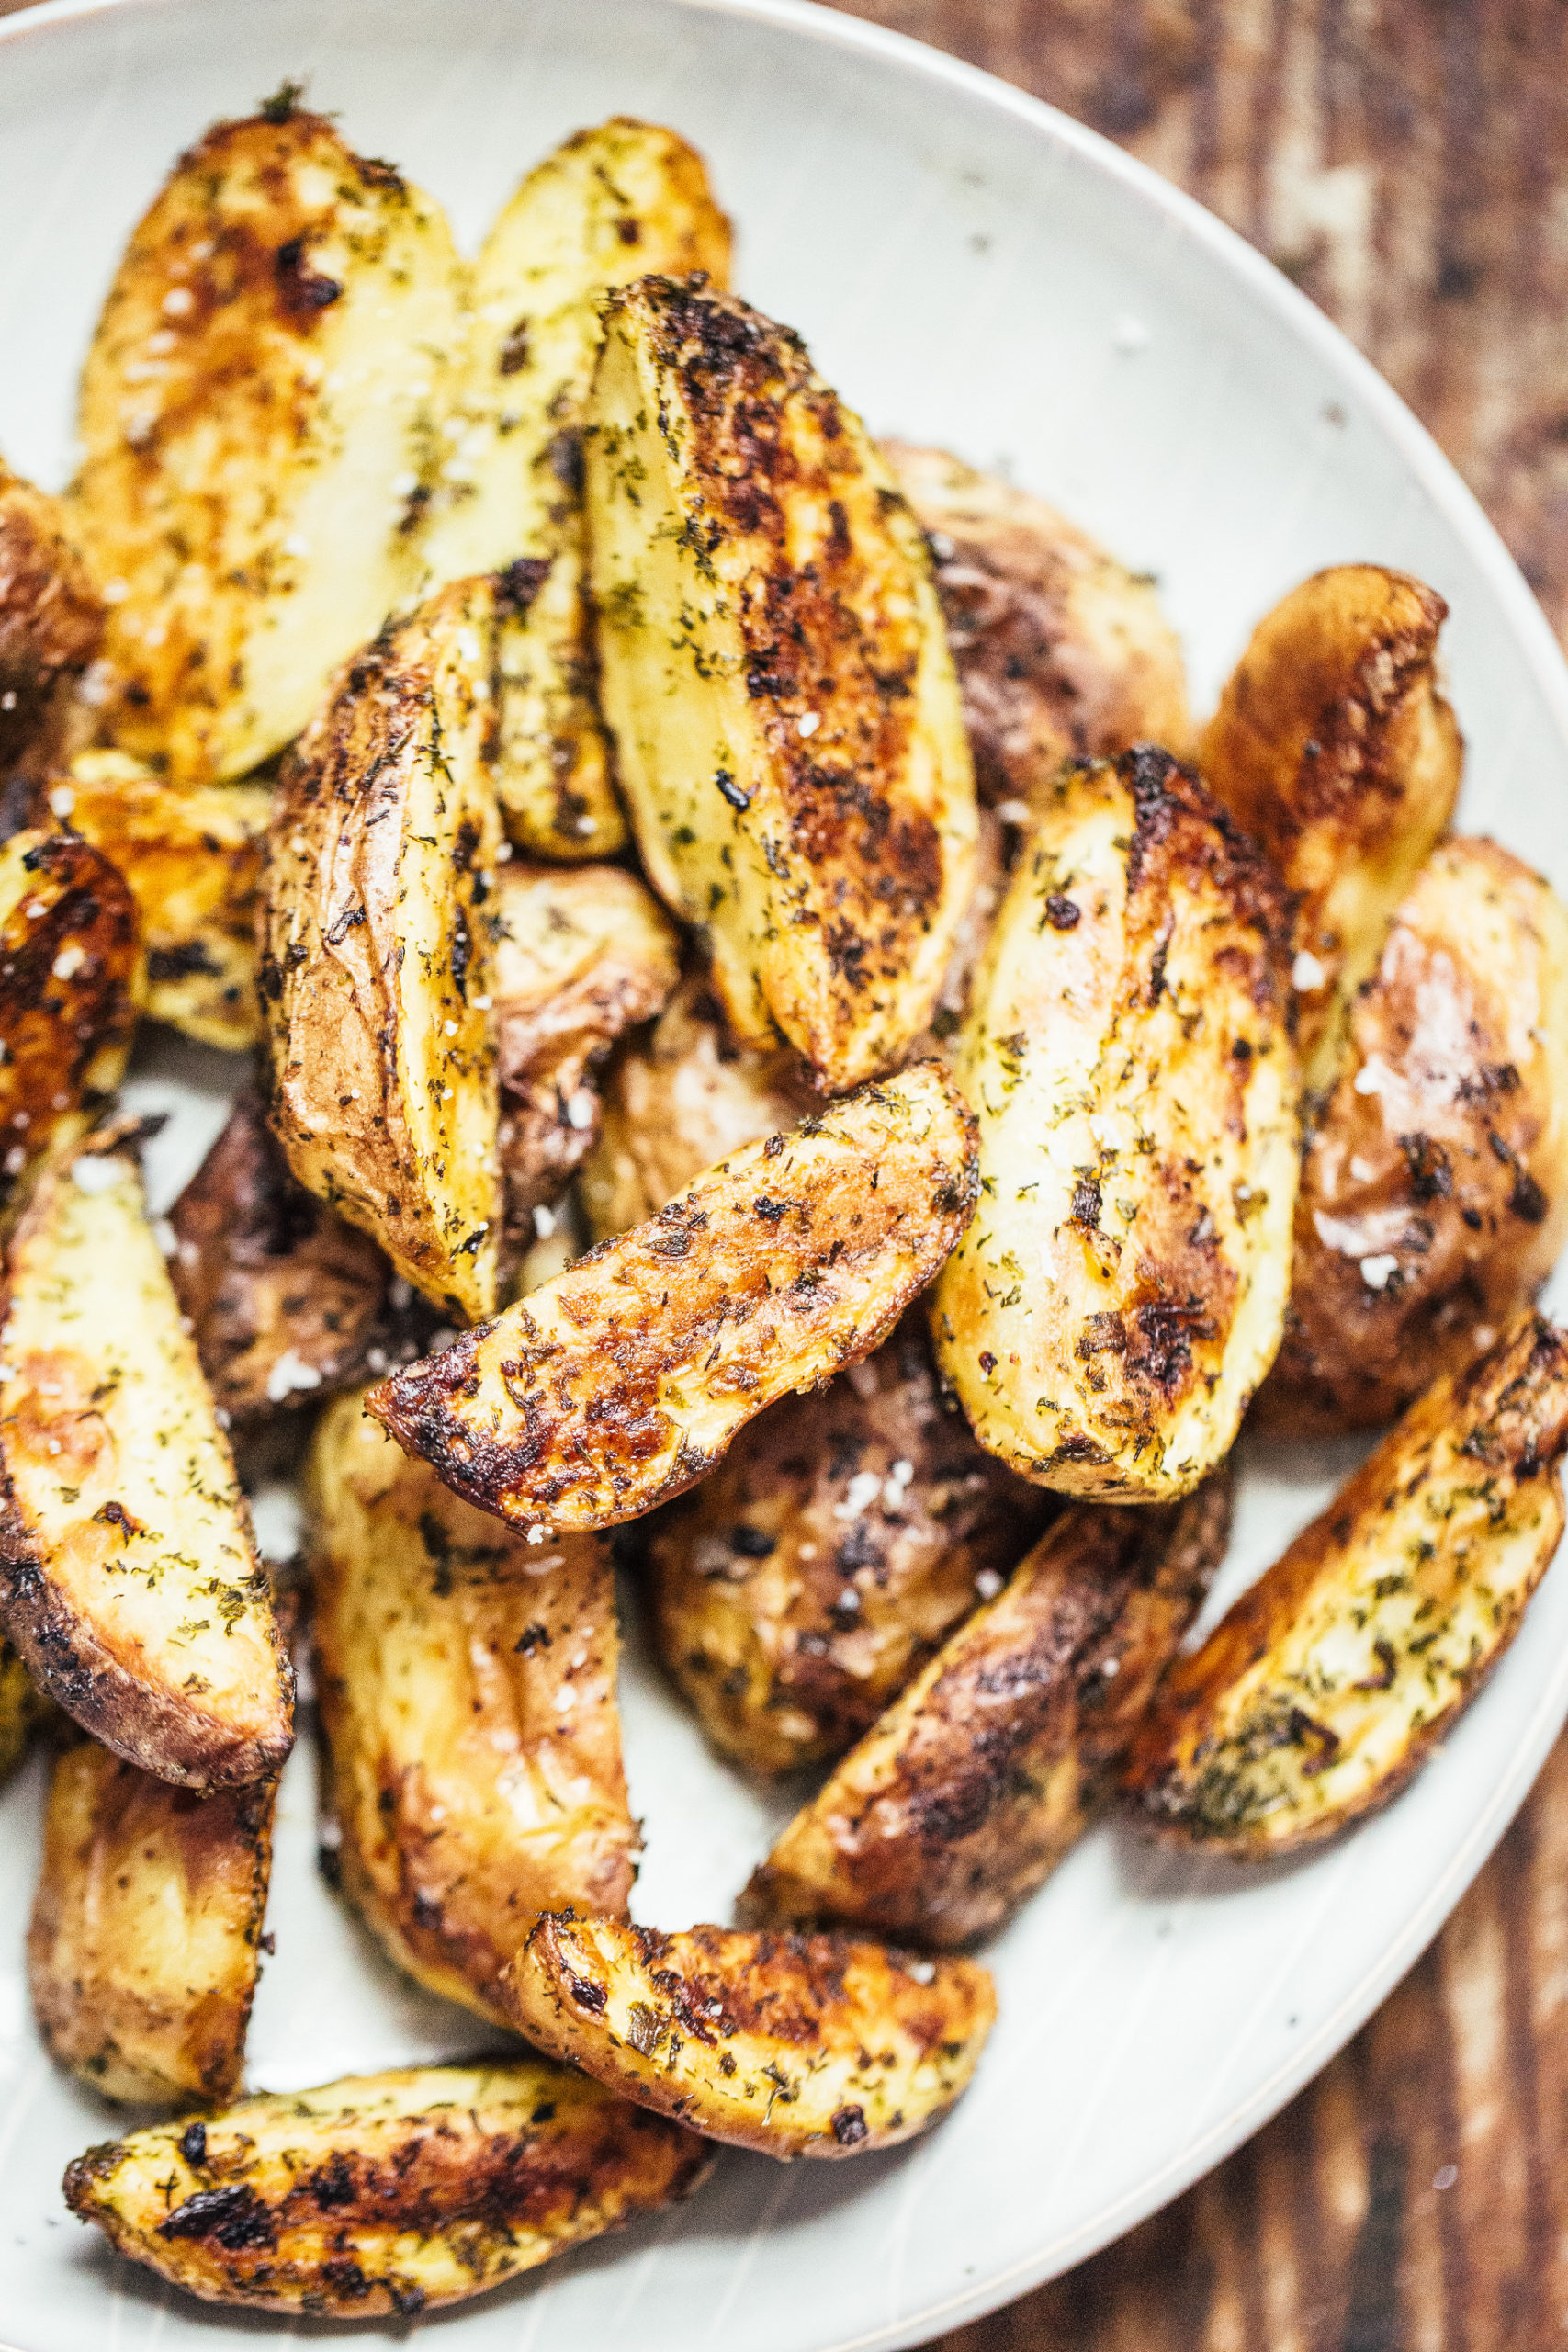 How to Make Herb Roasted Potato Wedges (plus 5 great ways to serve them)